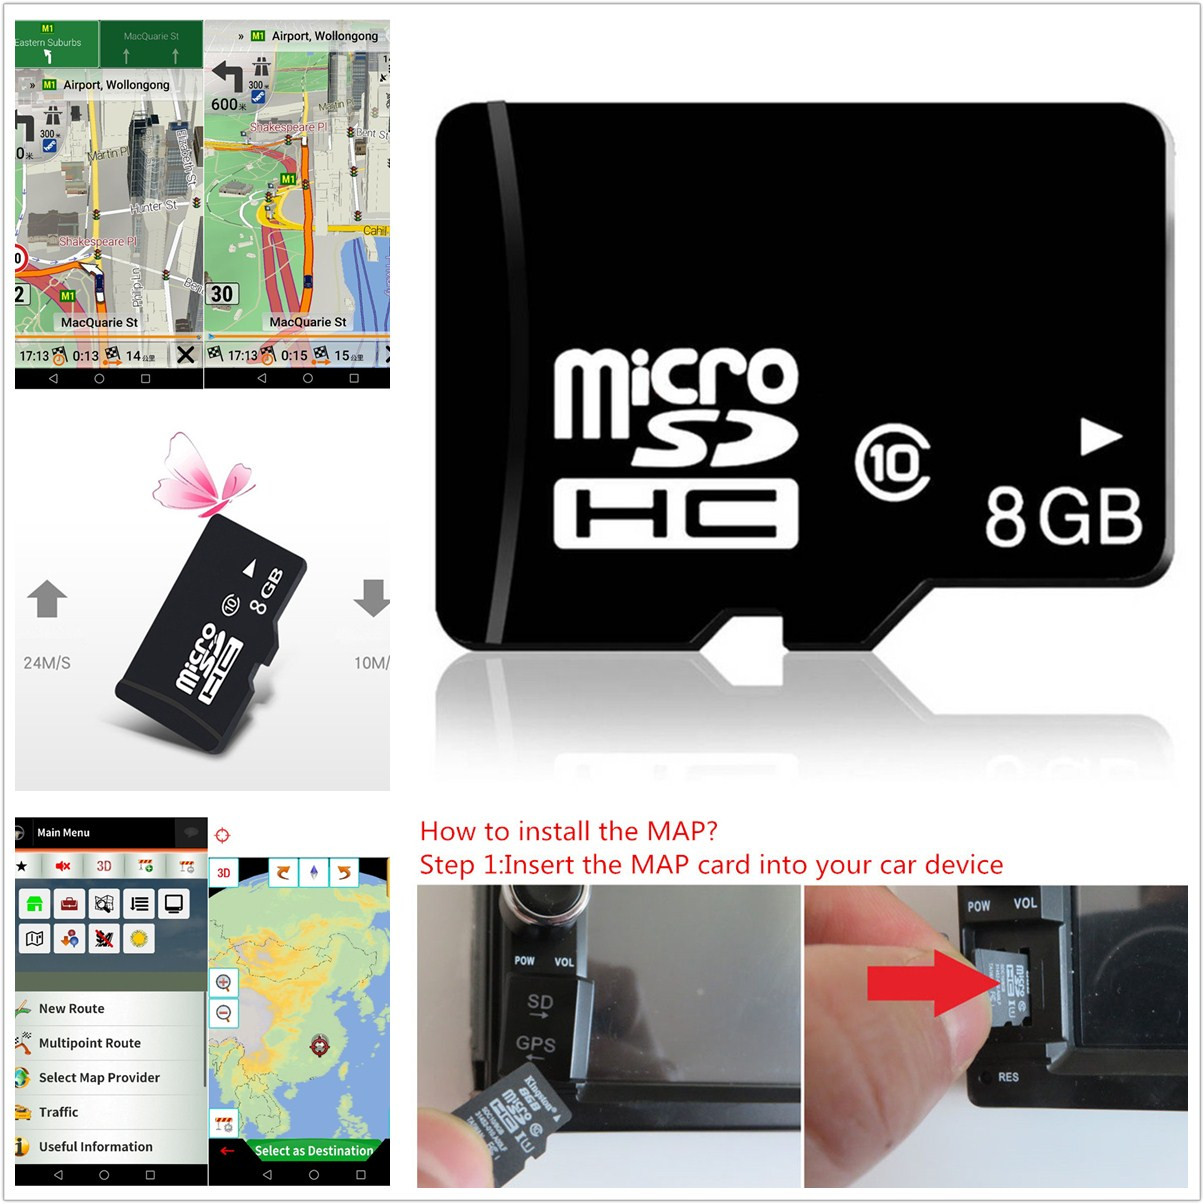 8GB Europe Micro SD Card Car SUV GPS Navigation Map Software For Android System | eBay